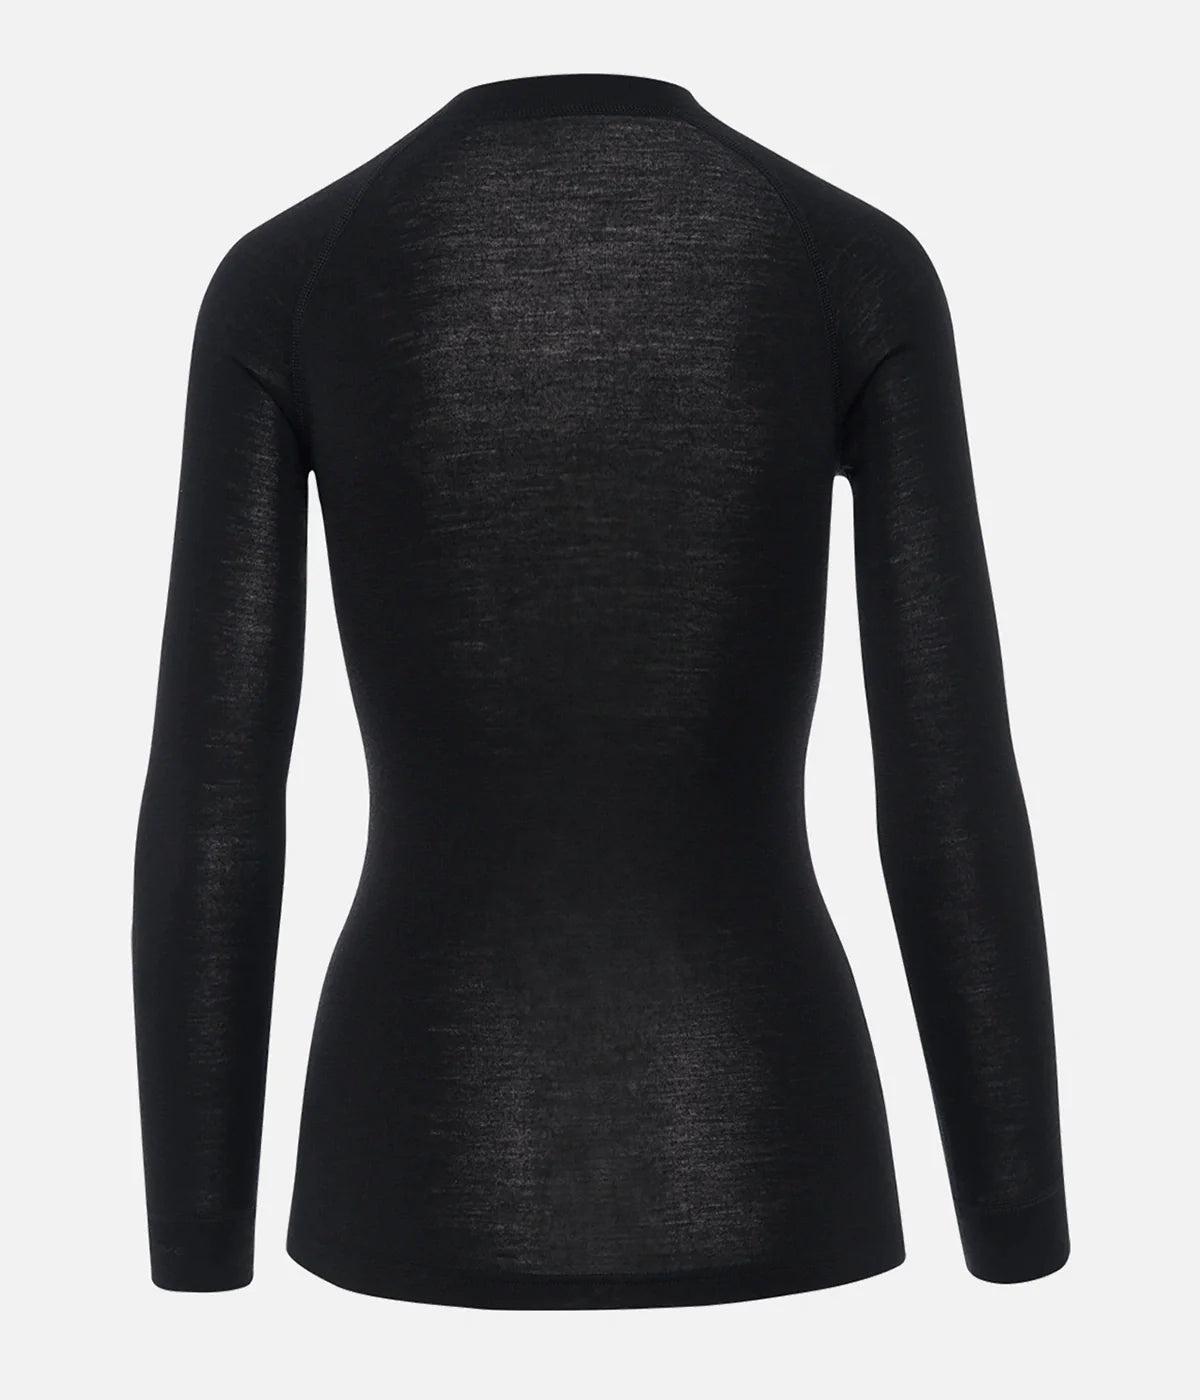 Waves Of Warmth Brushed - Technical Long Sleeve Thermal Top for Women